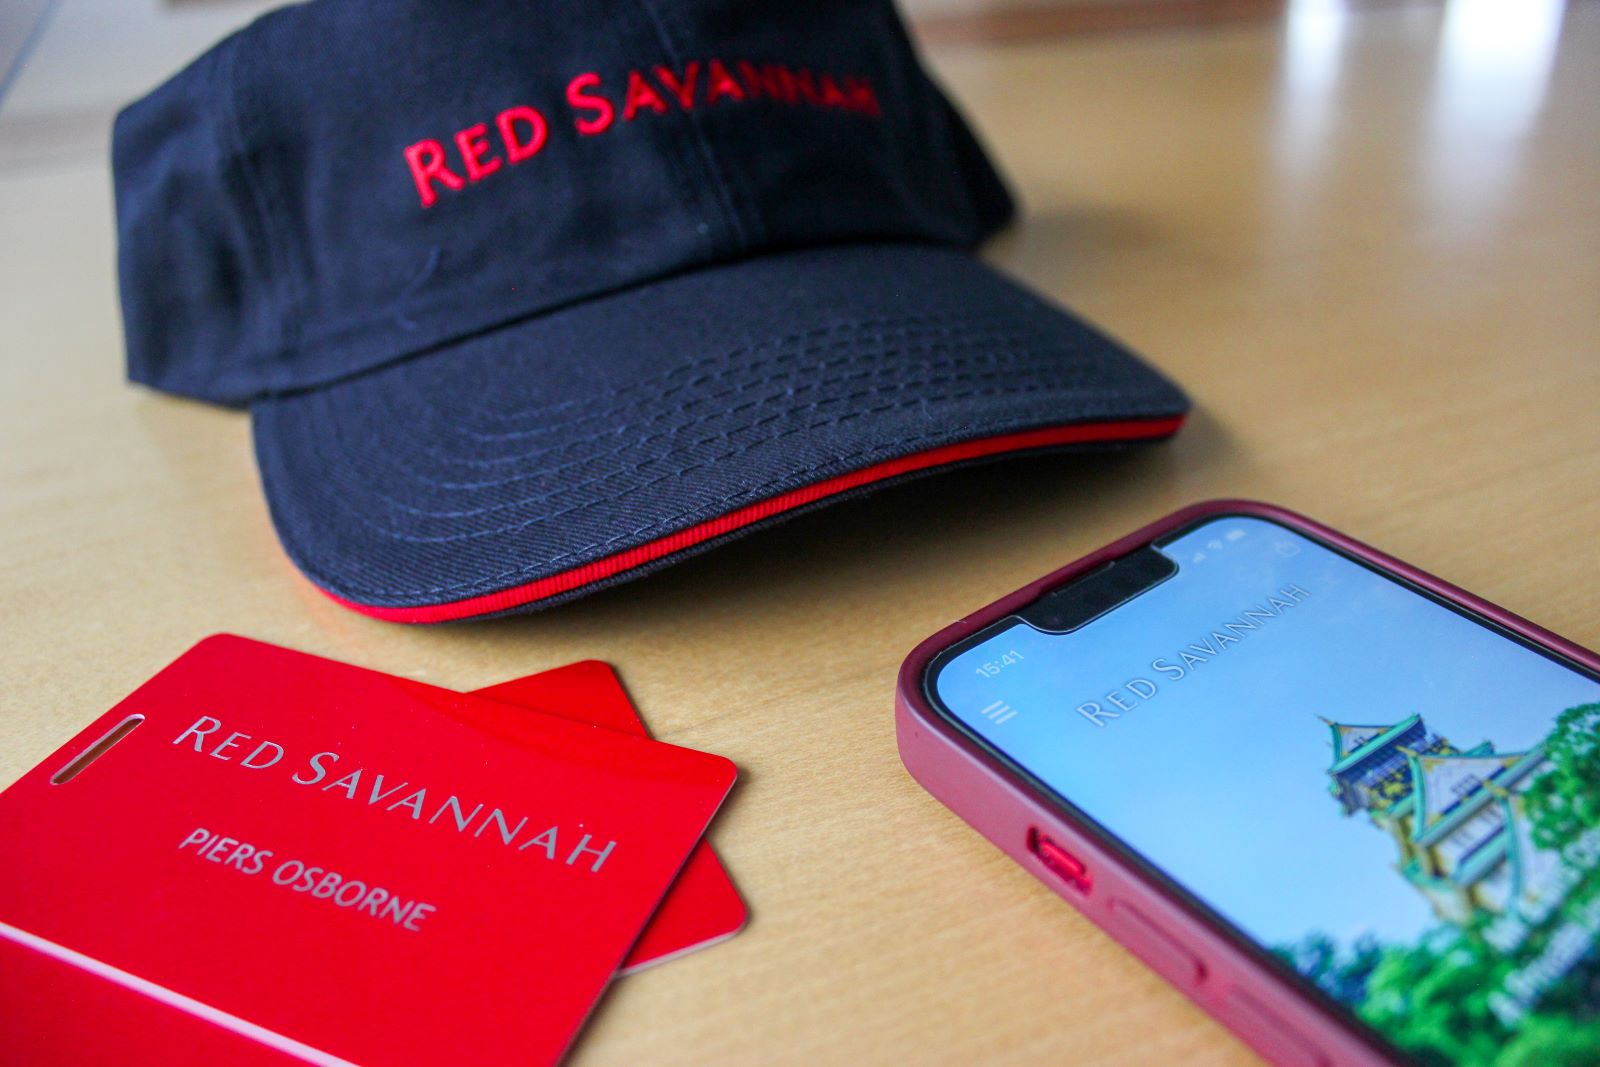 Red Savannah branded merchandise including a cap, luggage tags and Vamoos screen